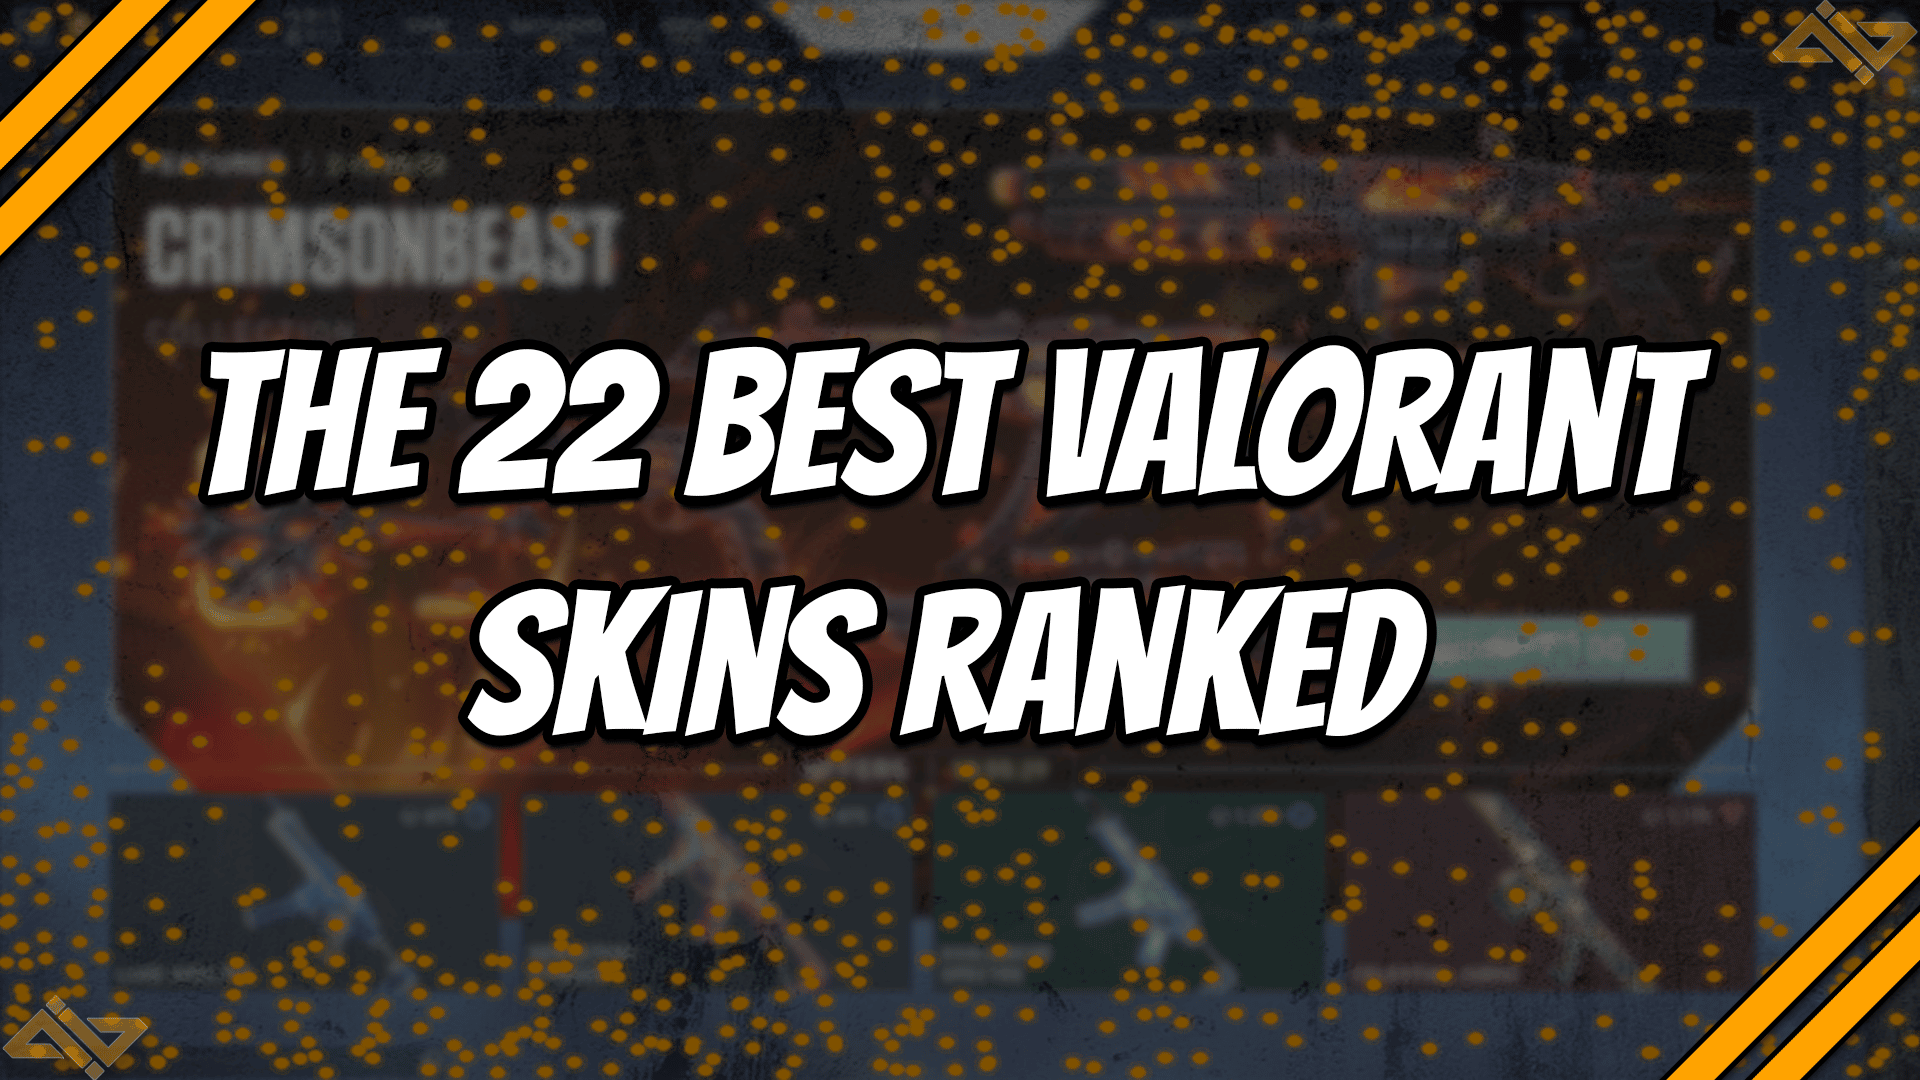 The 22 best Valorant skins ranked with the skin store as background